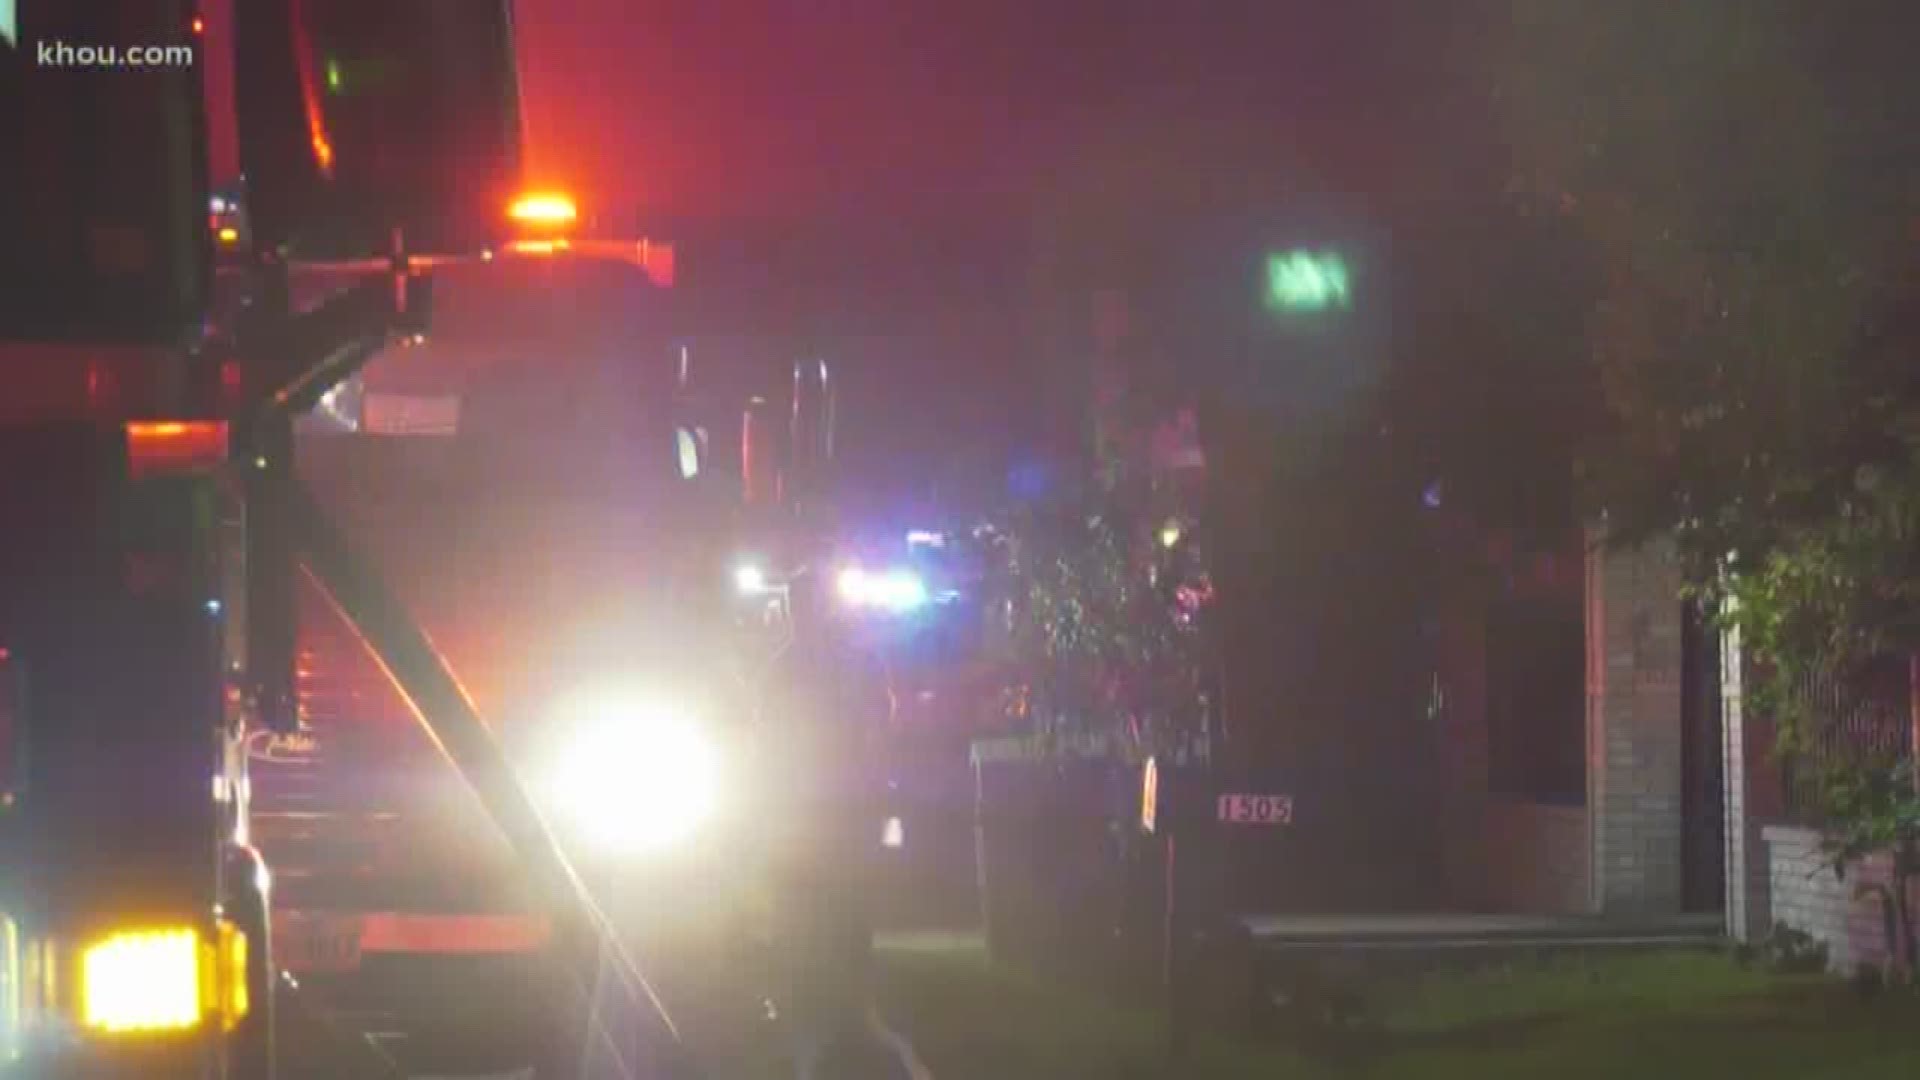 The Harris County Fire Marshal says a woman was killed when her family's mobile home caught fire in the Aldine community early Friday.